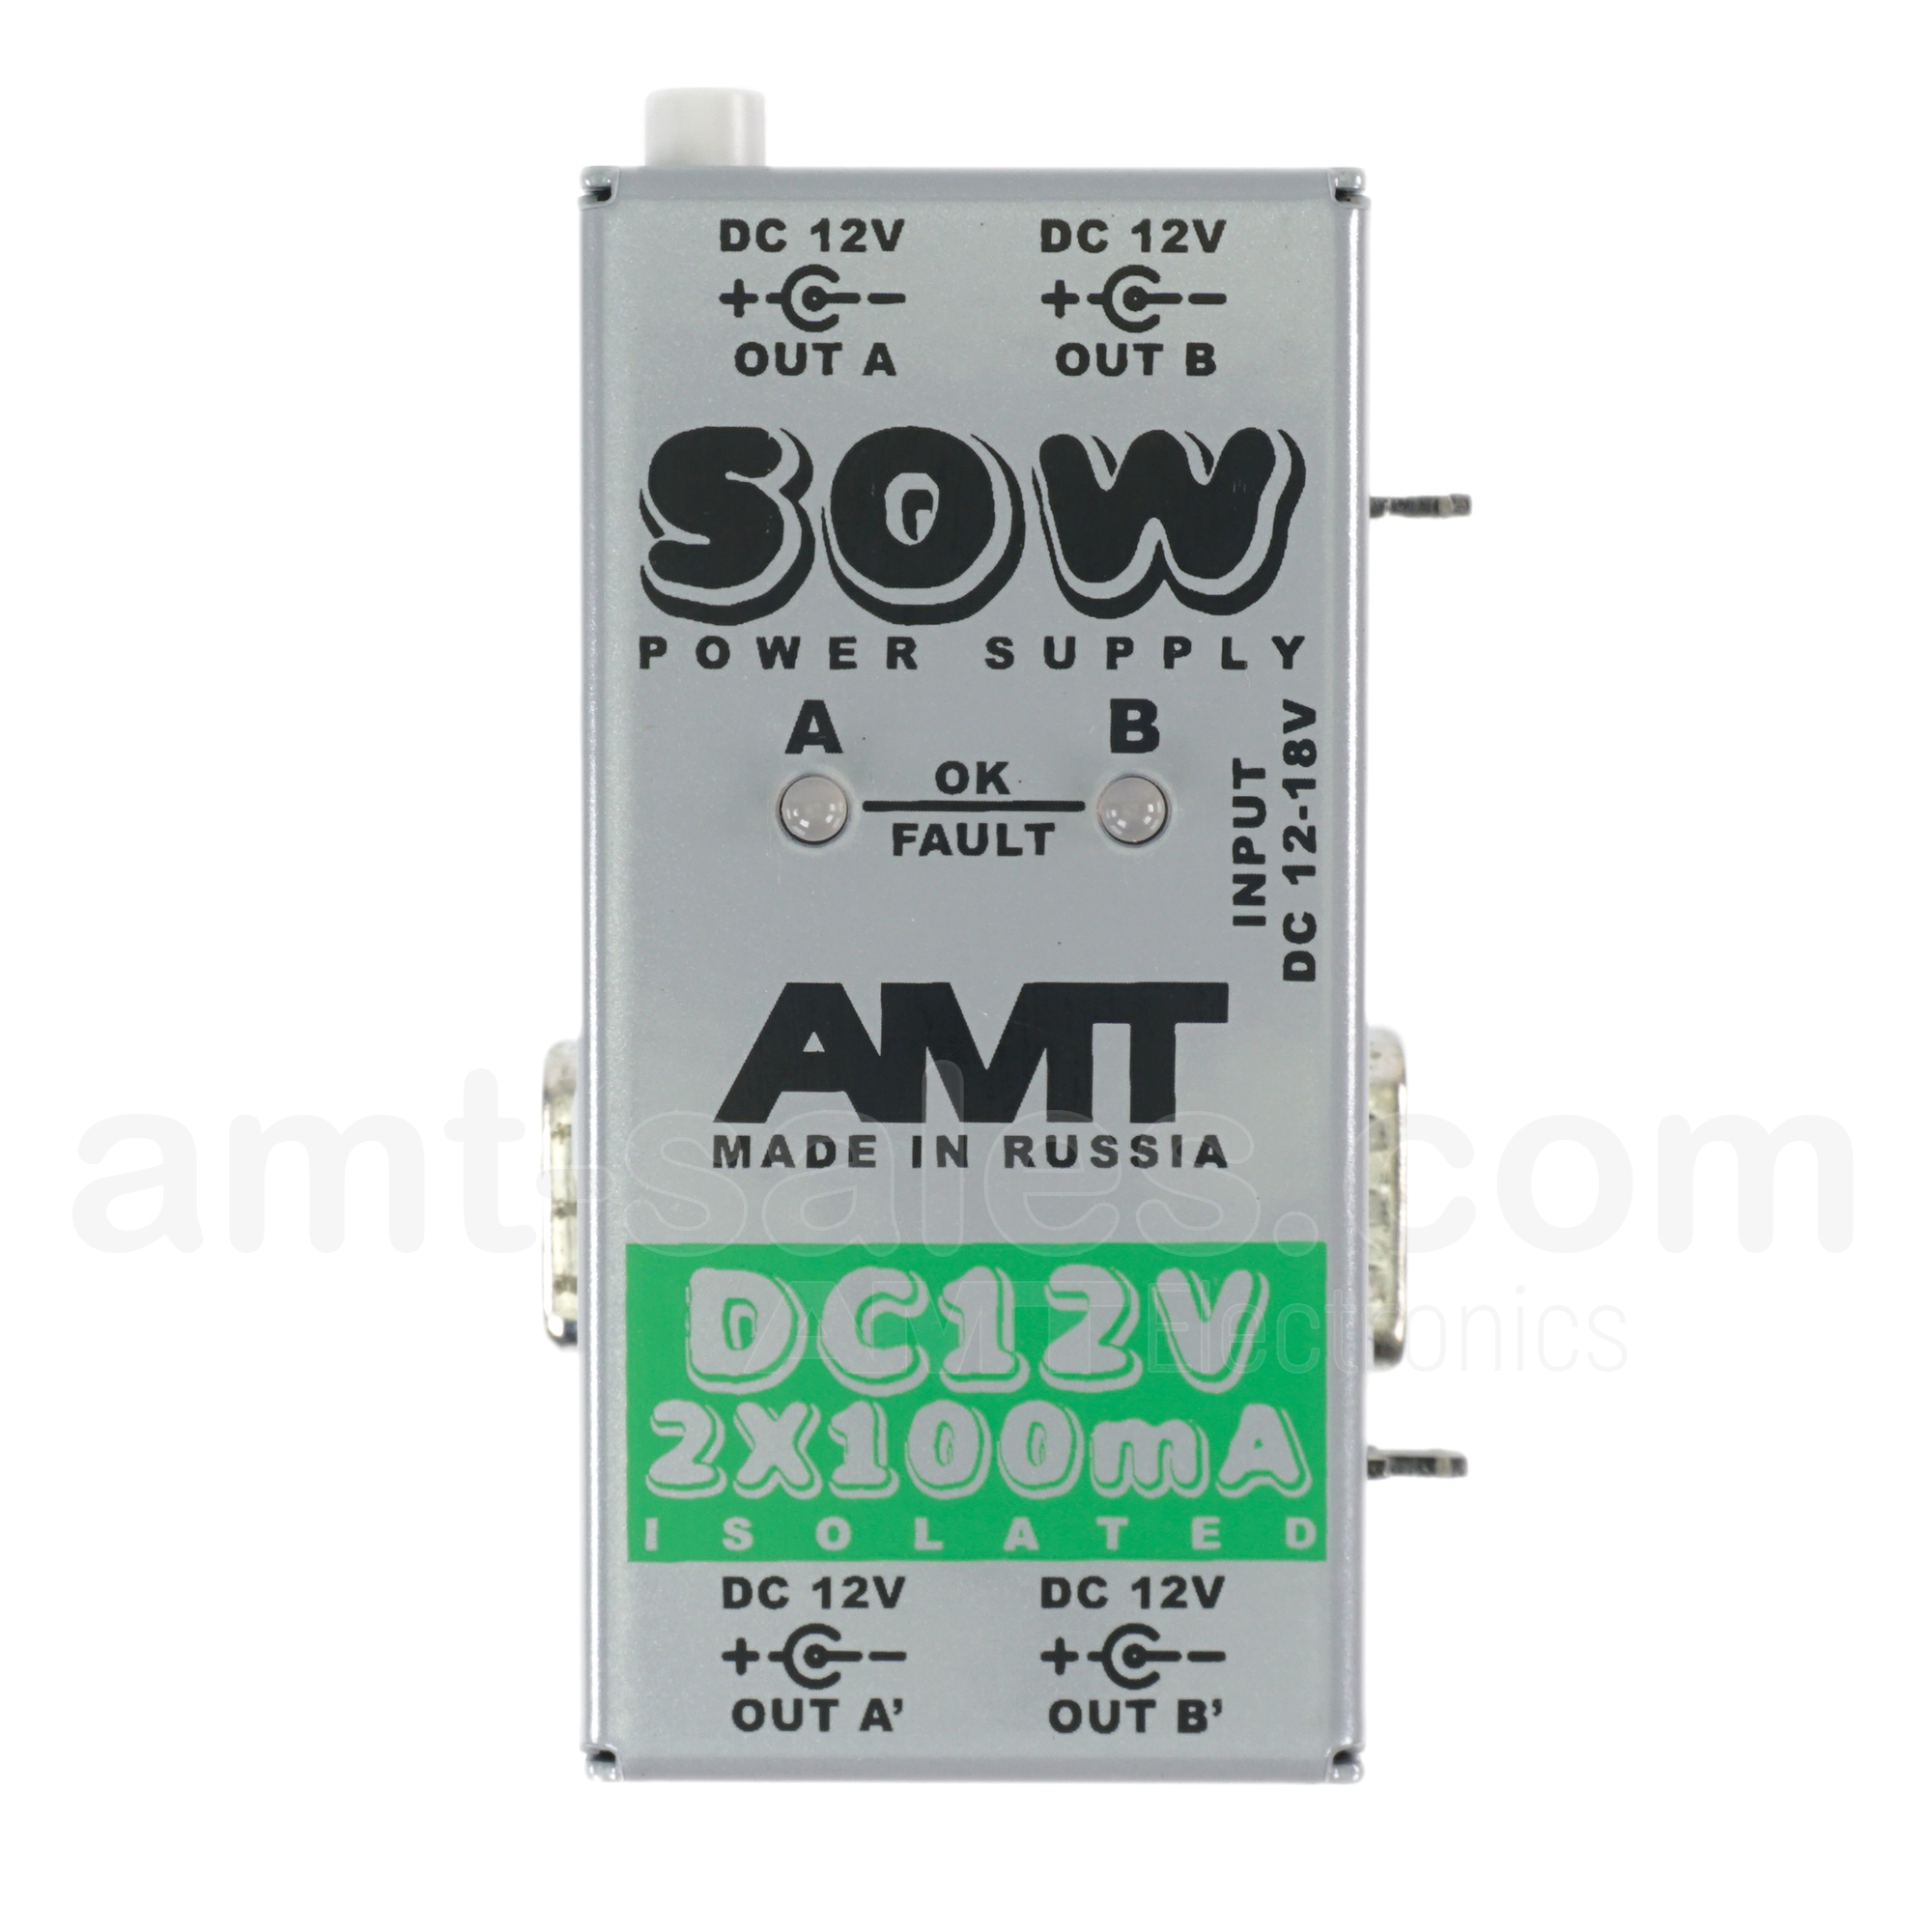 AMT SOW PS-2 DC-12V 2x100mA - power supply module